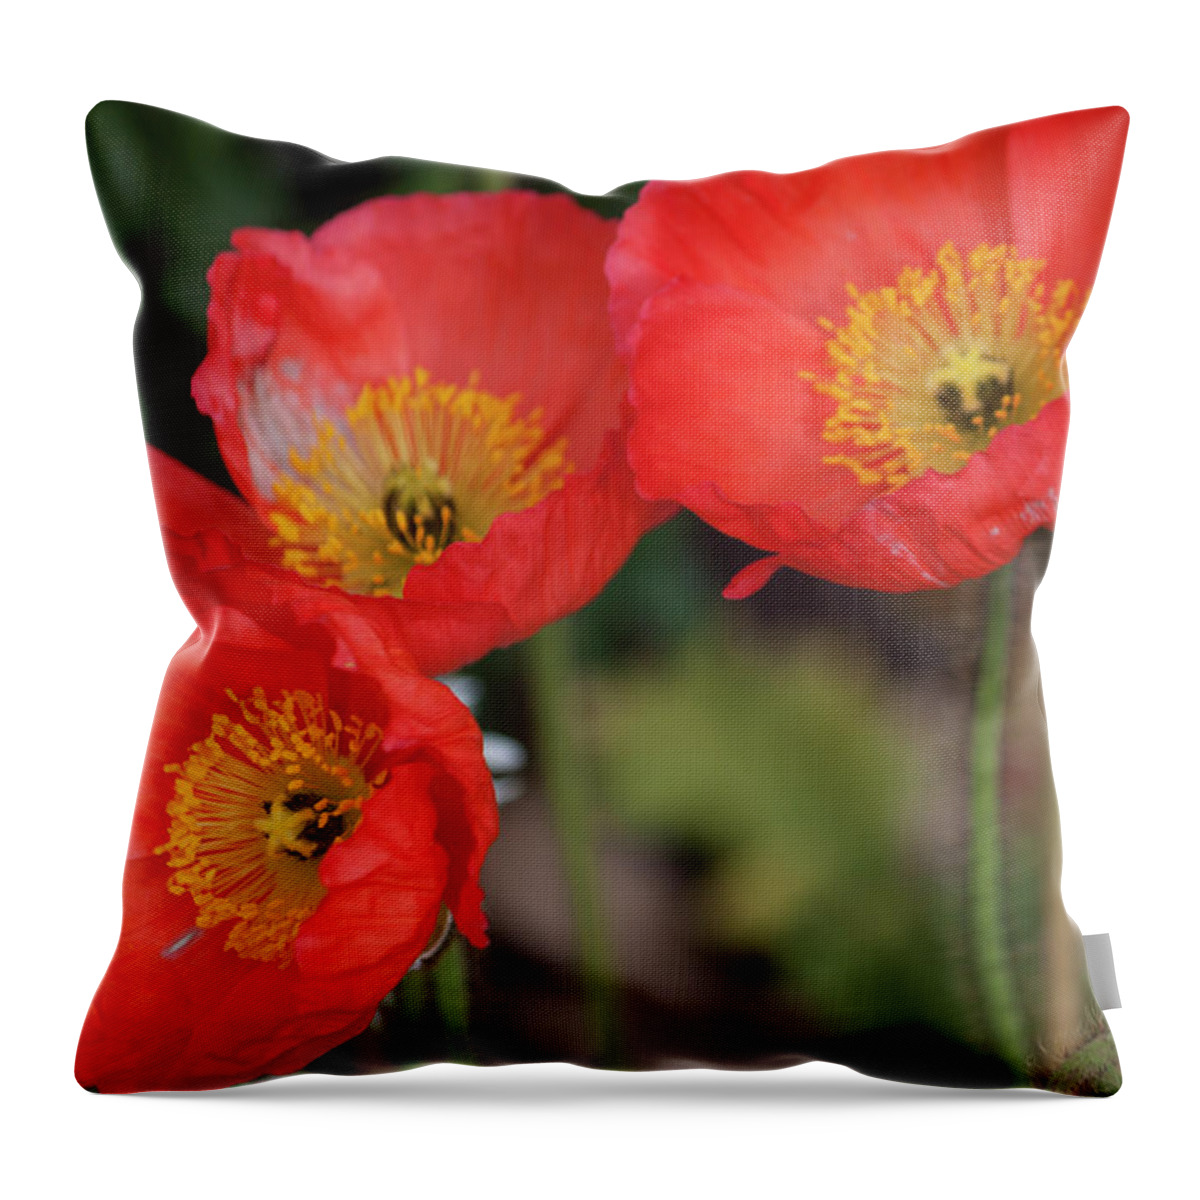 Photograph Throw Pillow featuring the photograph Trio of Red Poppies by Suzanne Gaff